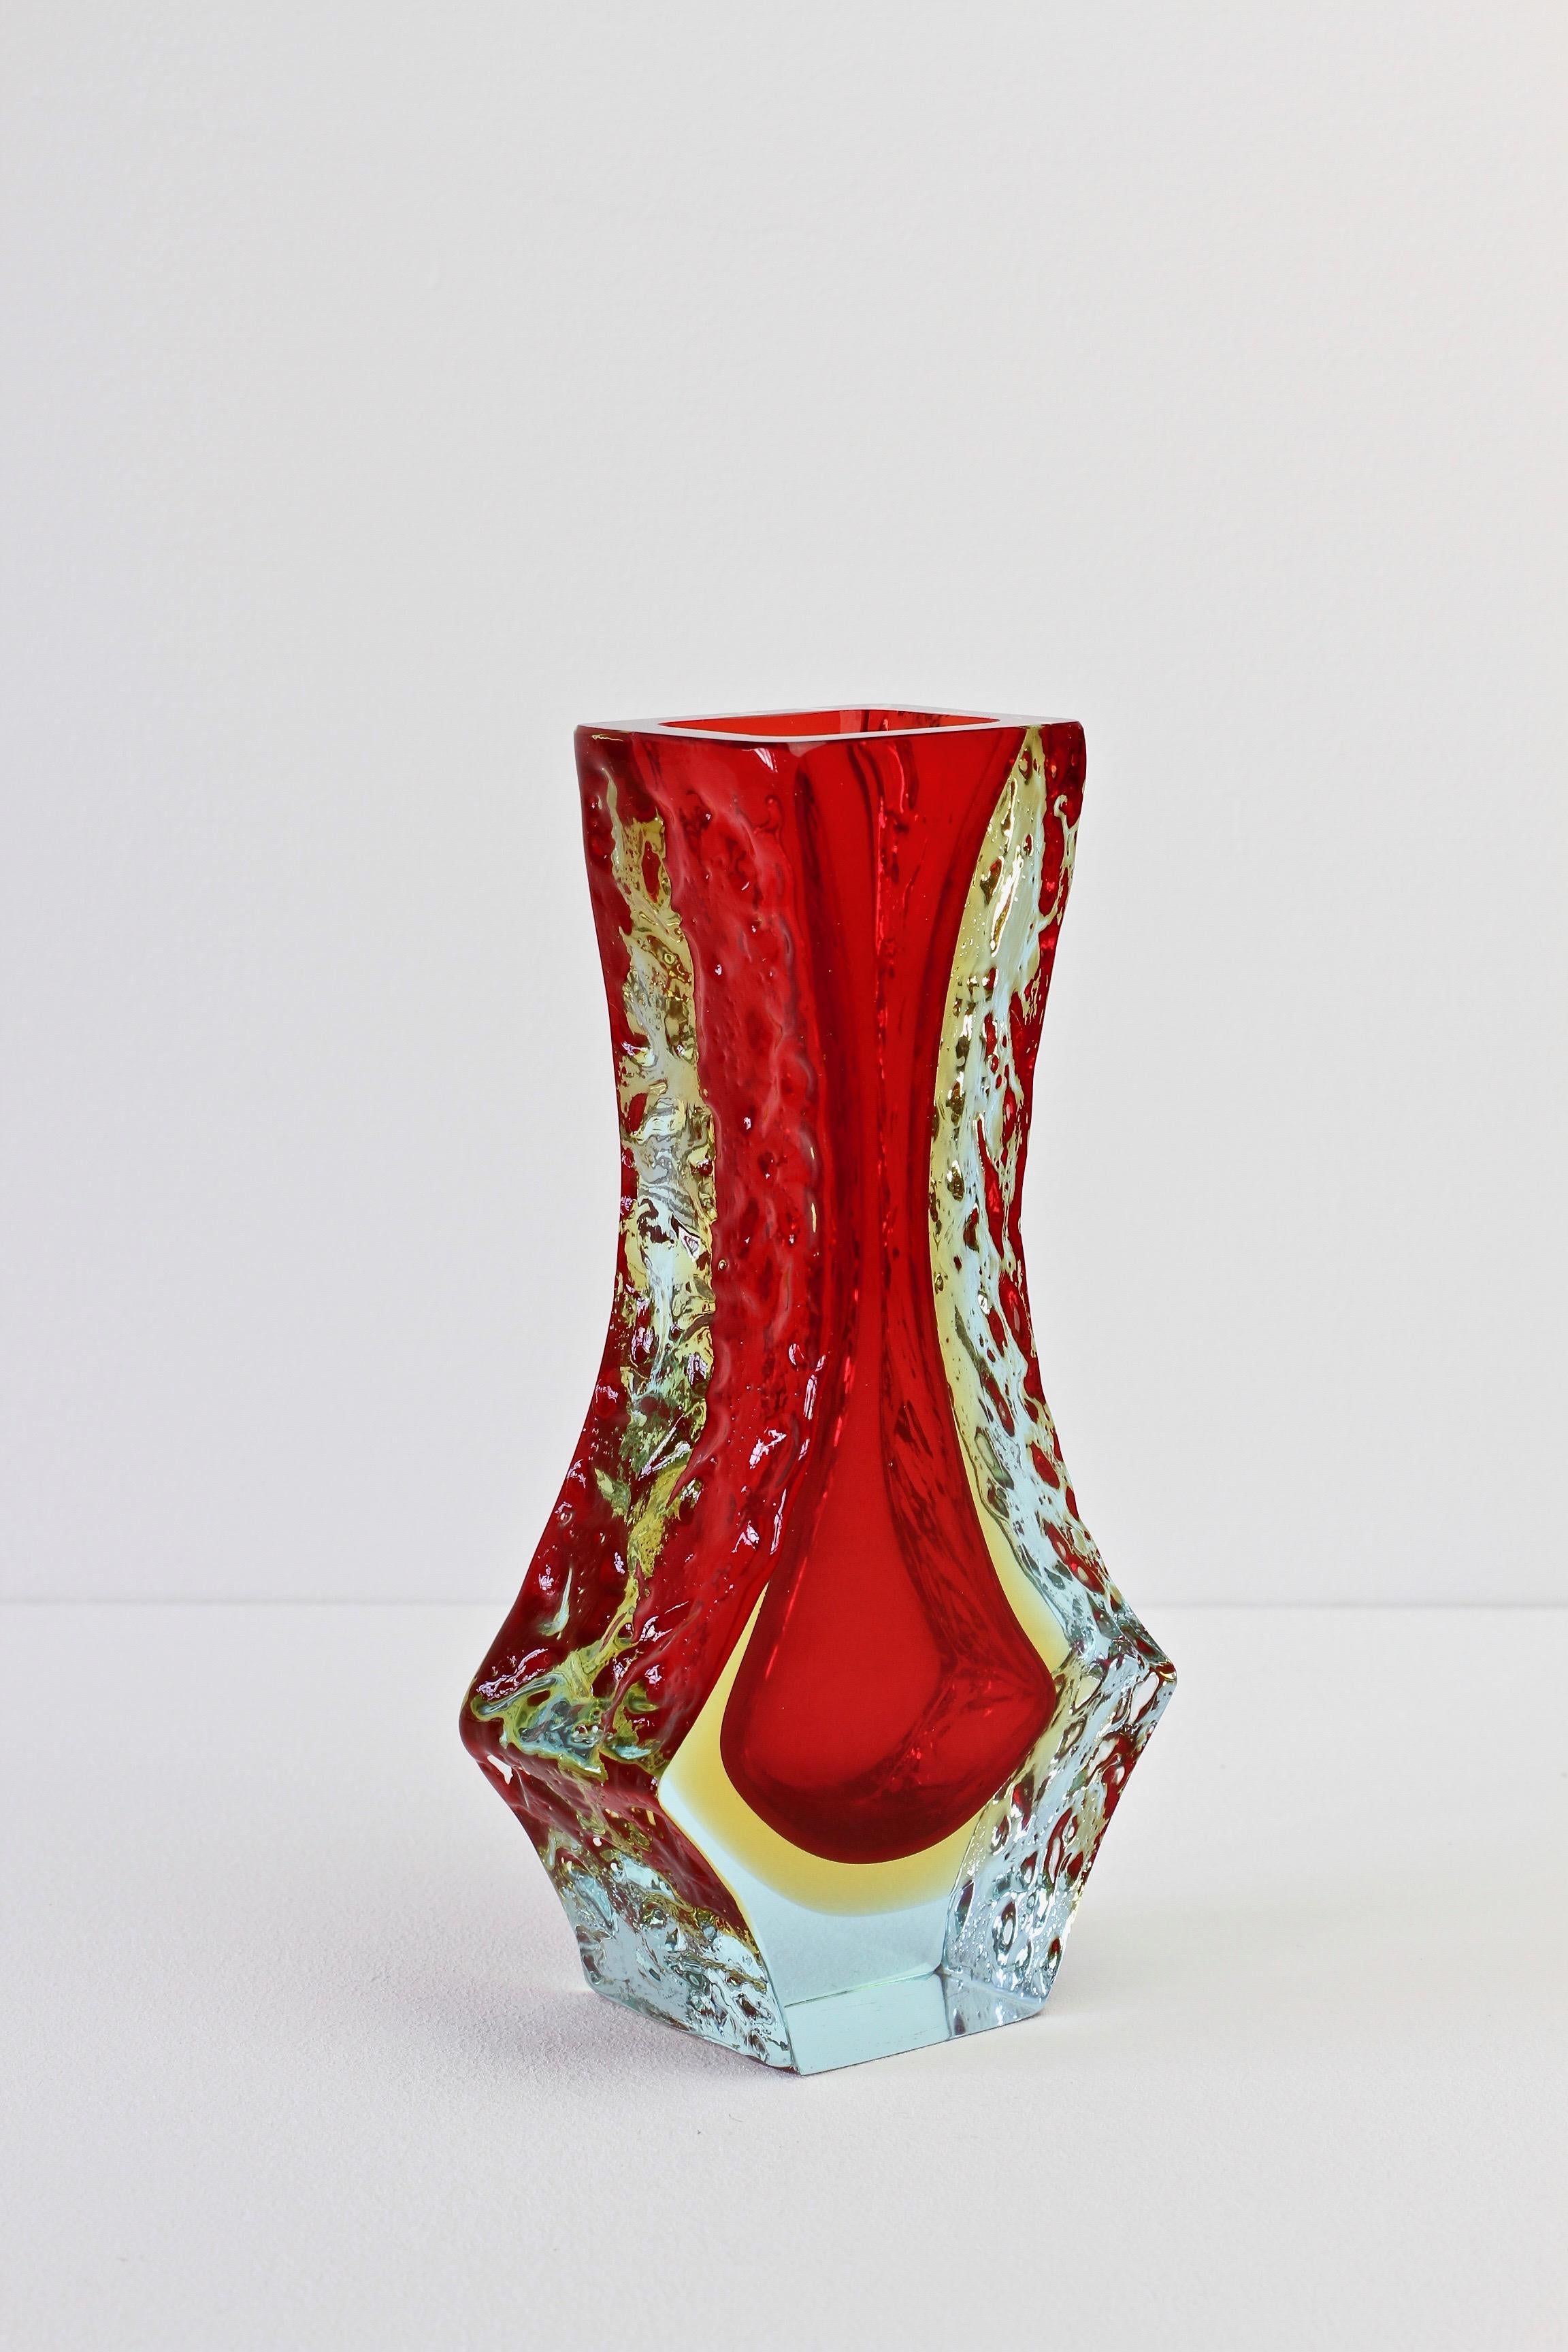 Italian Textured Faceted Murano 'Sommerso' Glass Vase Attributed to Mandruzzato 2